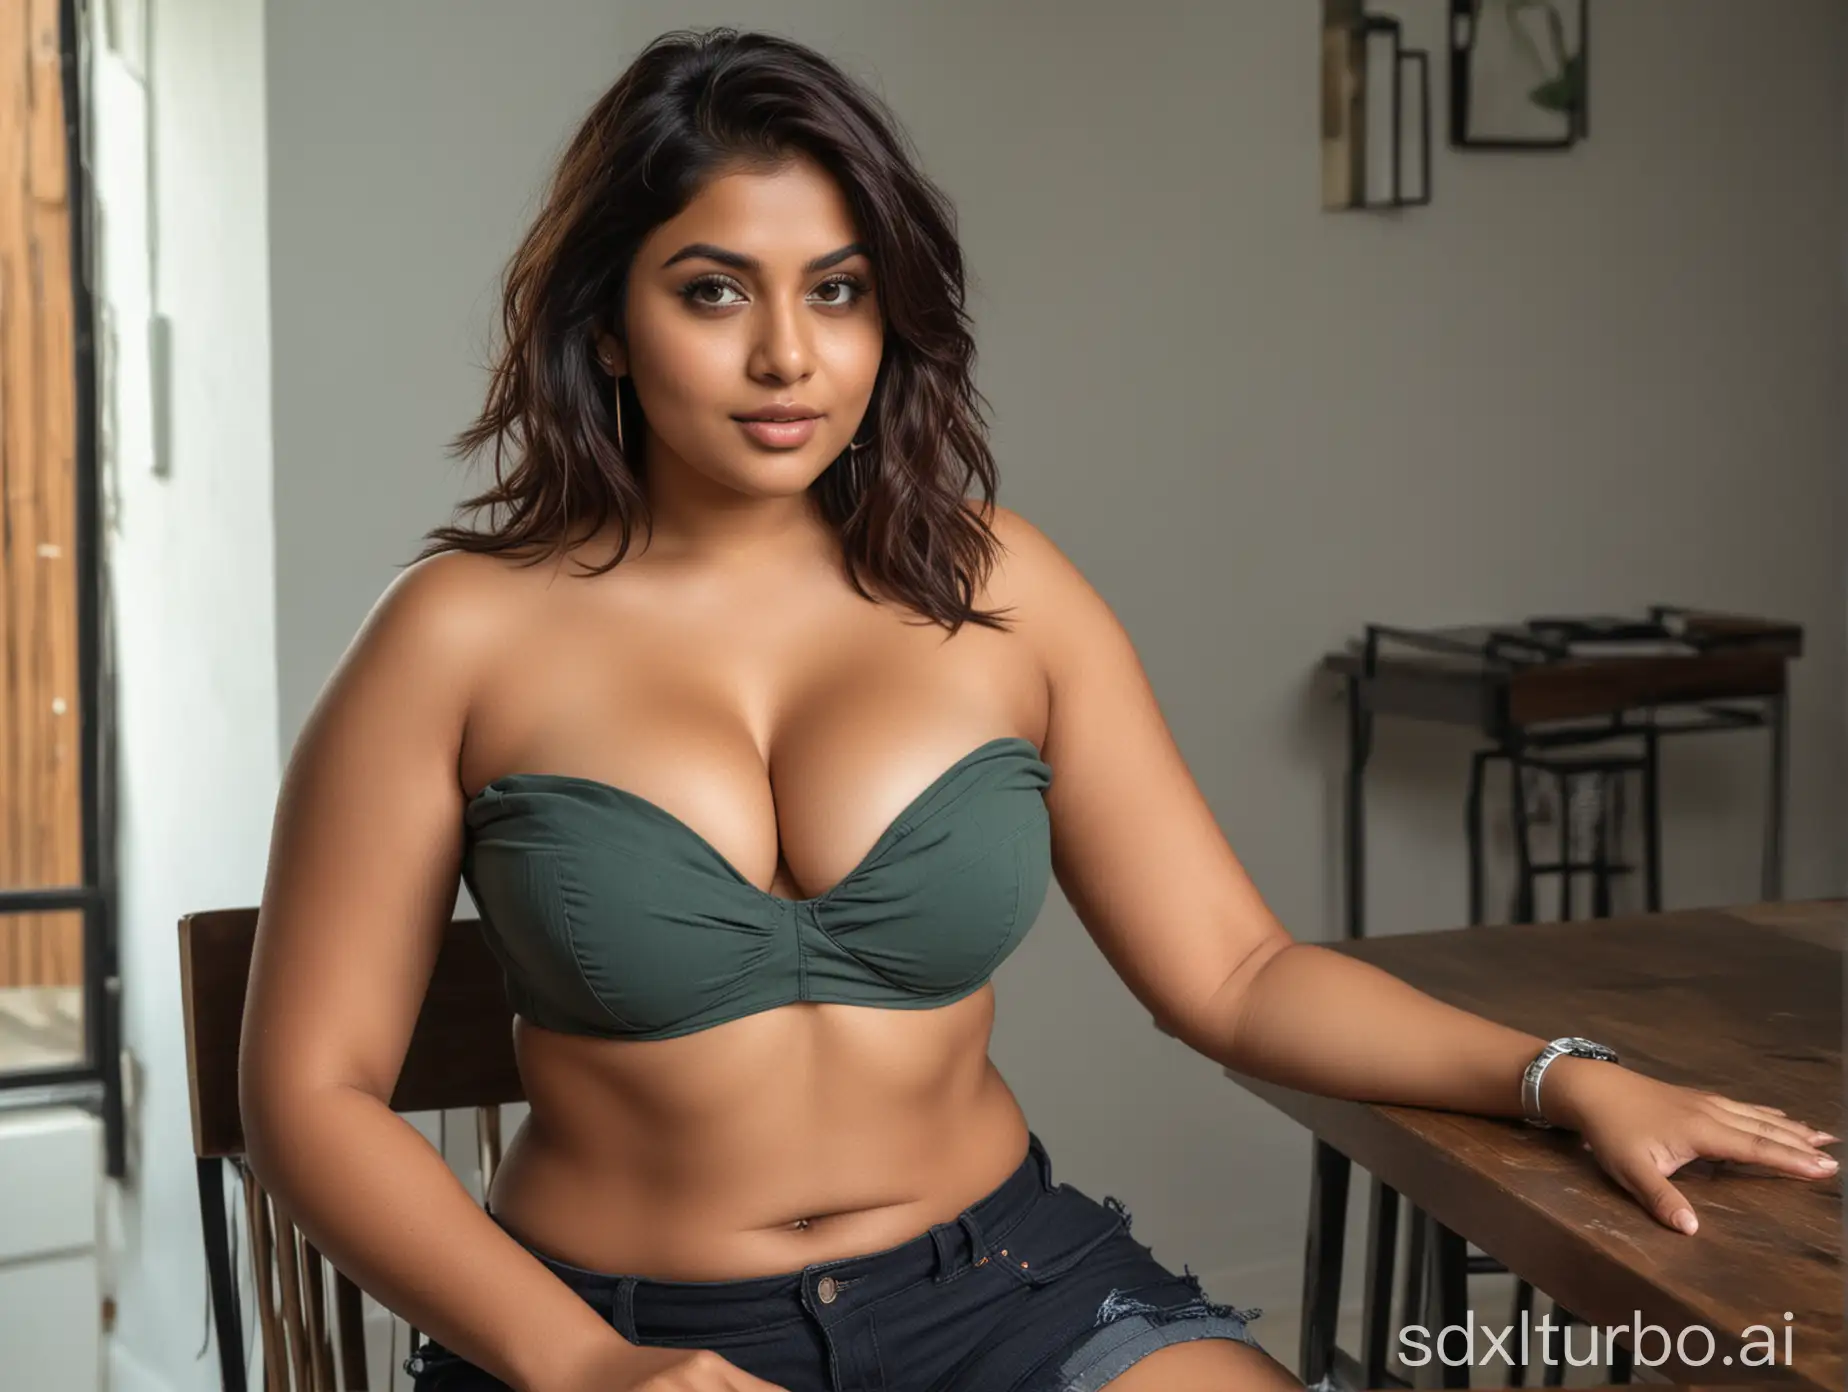 Sultry-Indian-Woman-in-Unbuttoned-Crop-Top-Sitting-at-Table